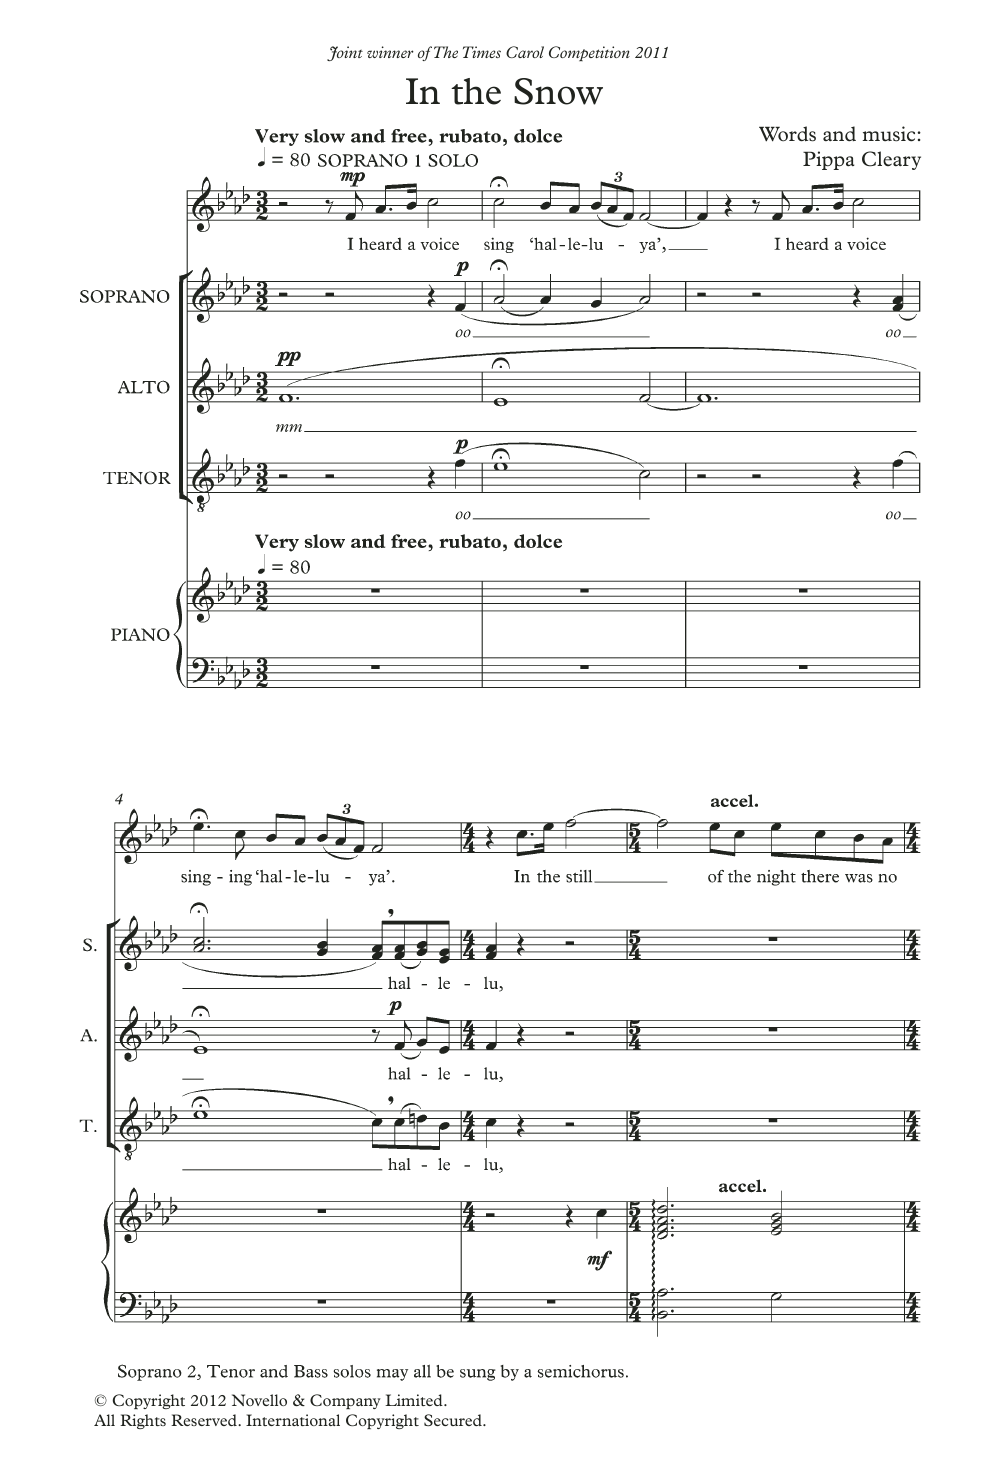 Download Pippa Cleary In The Snow Sheet Music